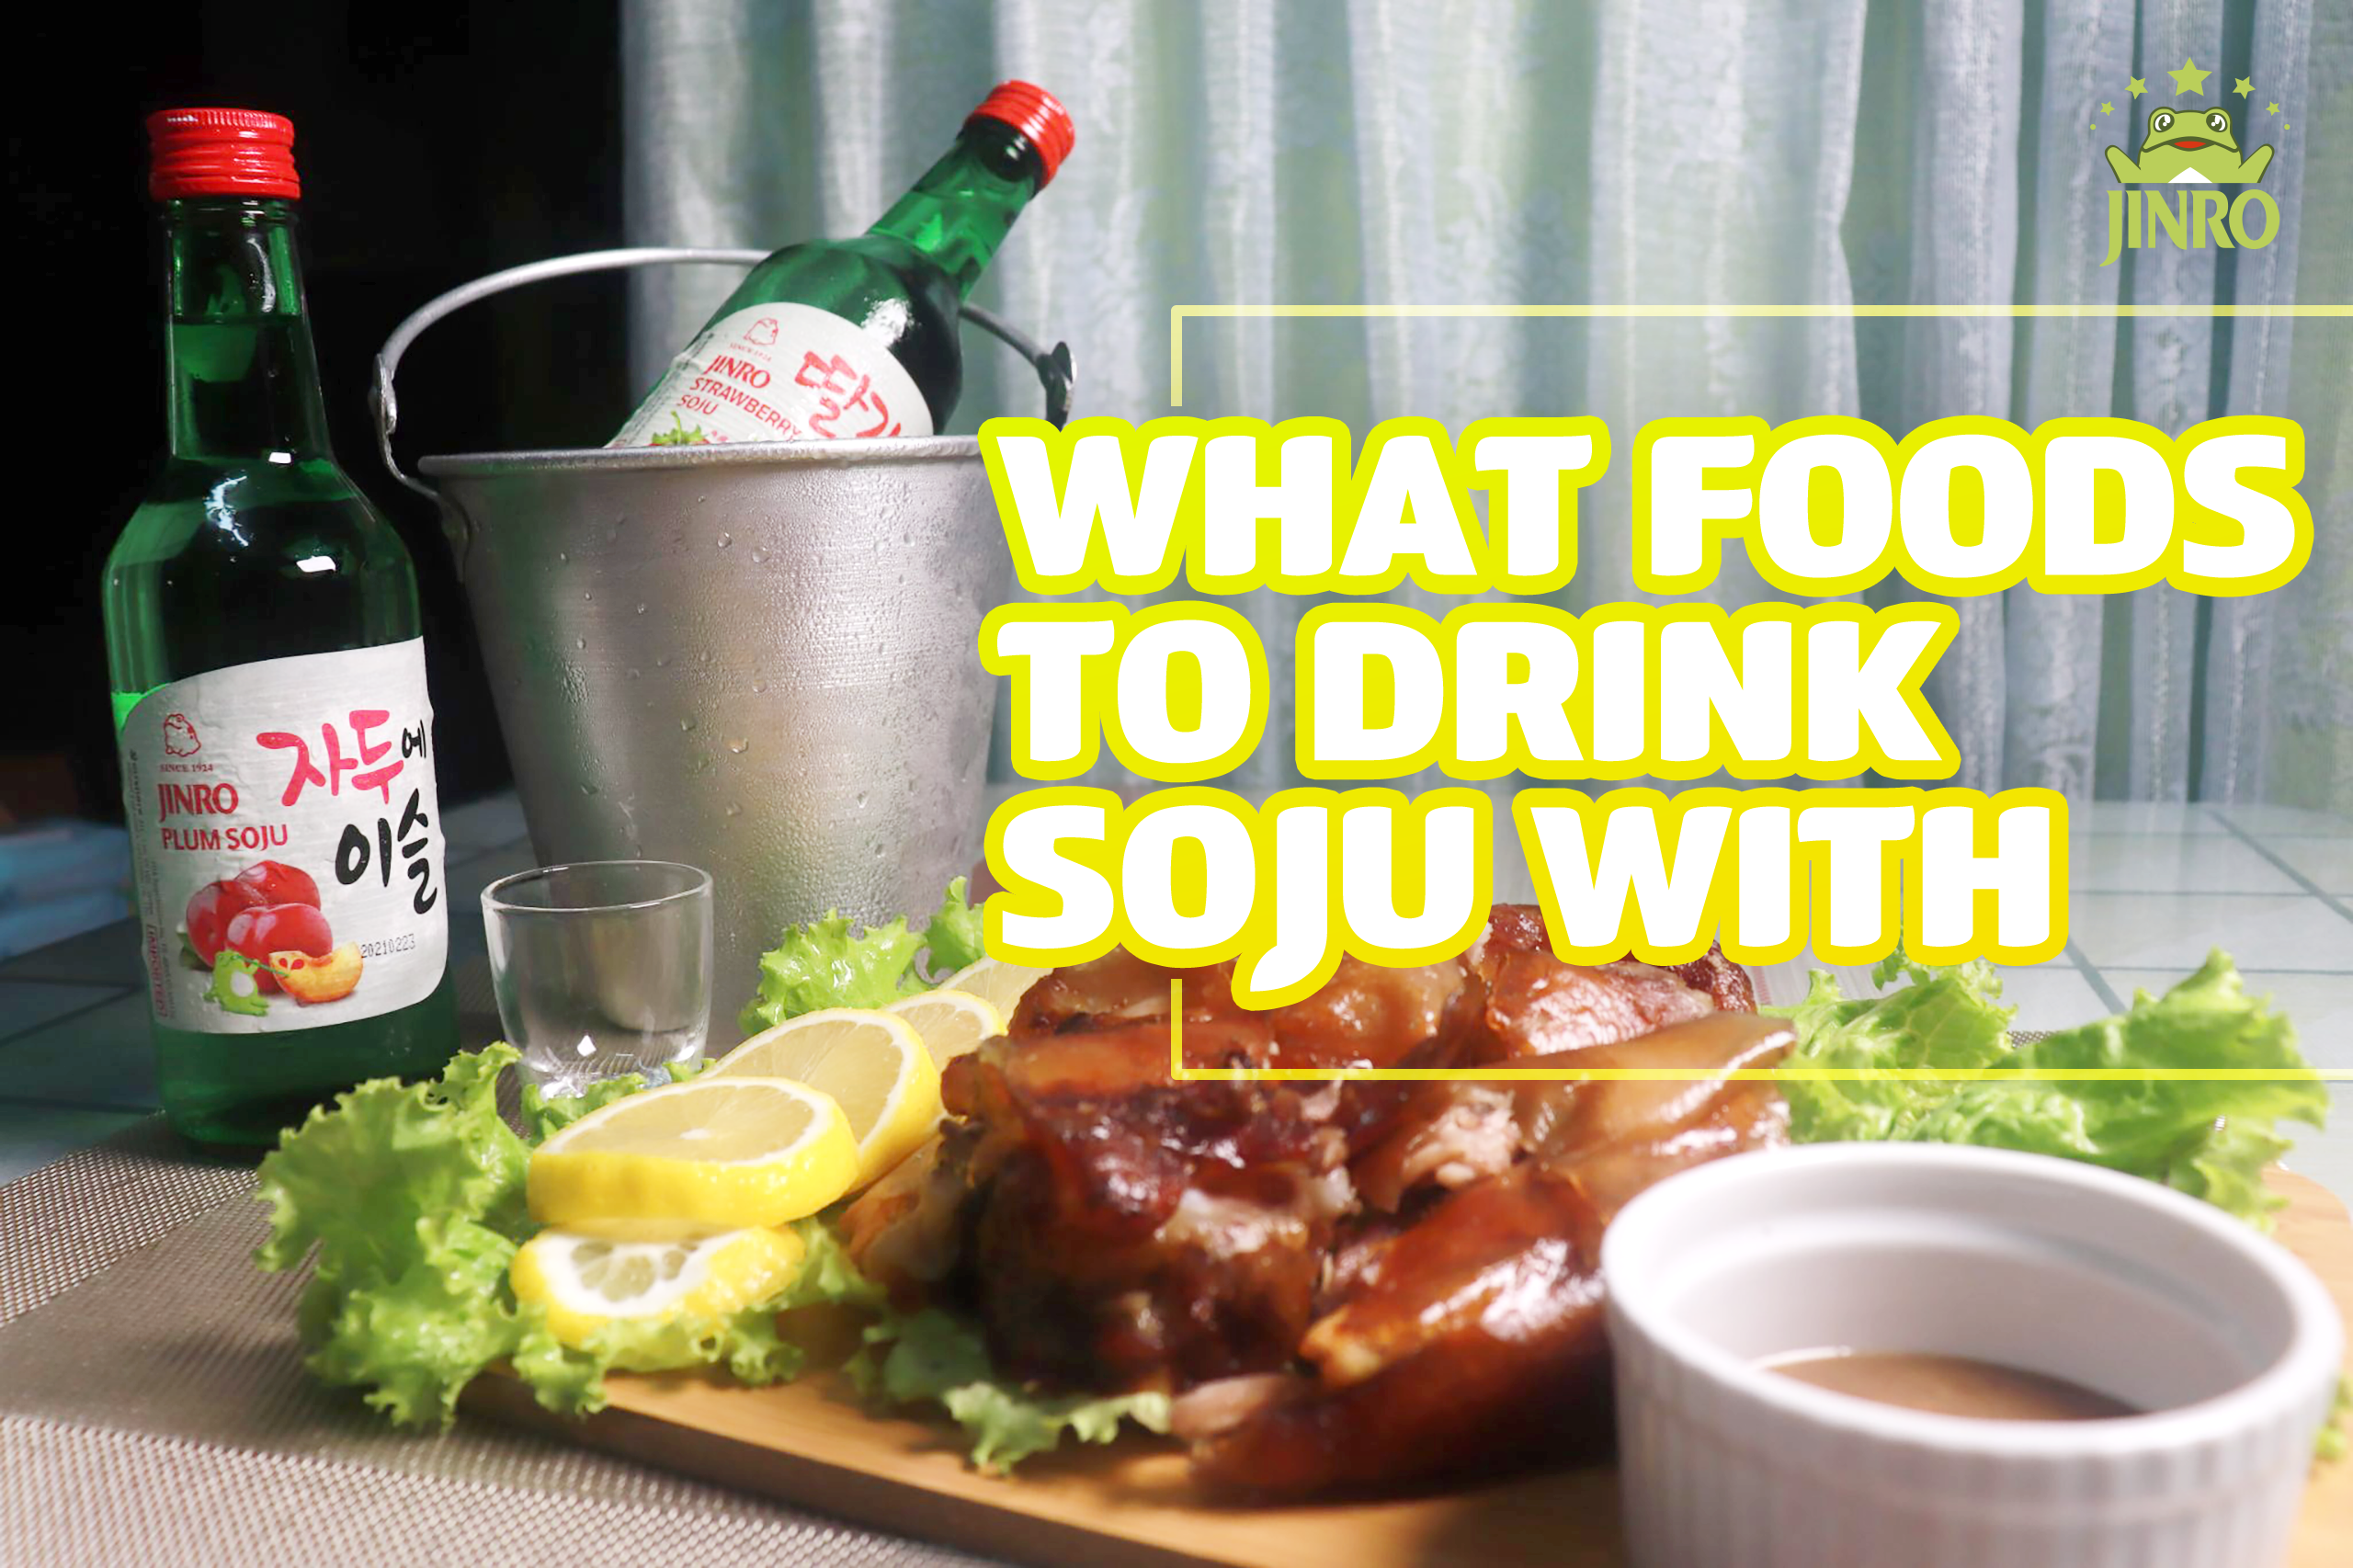 What foods to drink soju with